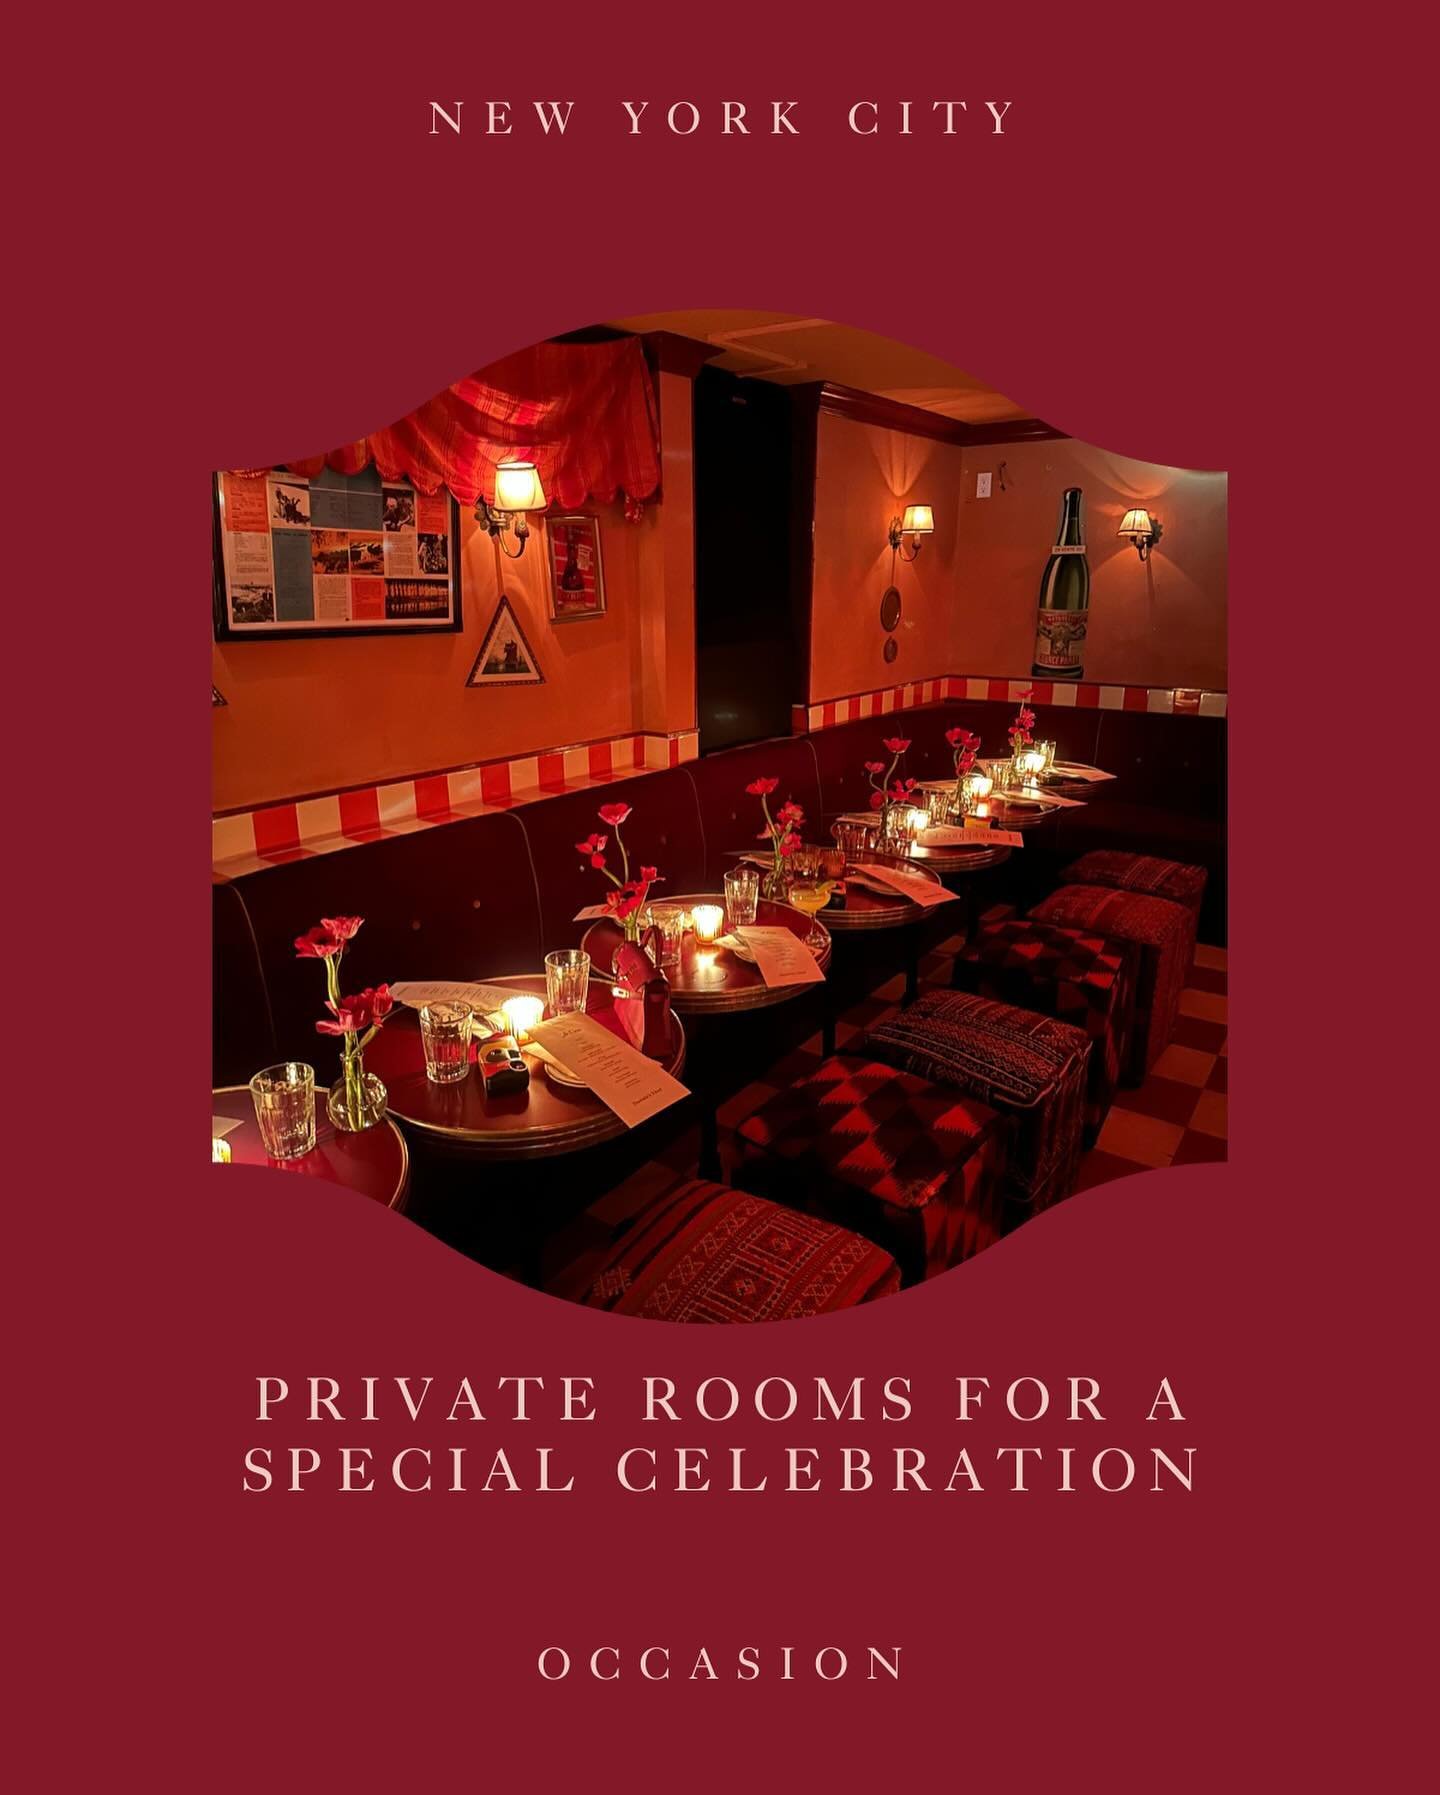 If you&rsquo;re hosting a Flirty dinner party, here are some dreamy private rooms.🤍

For the full guide, visit our website in the link in bio.